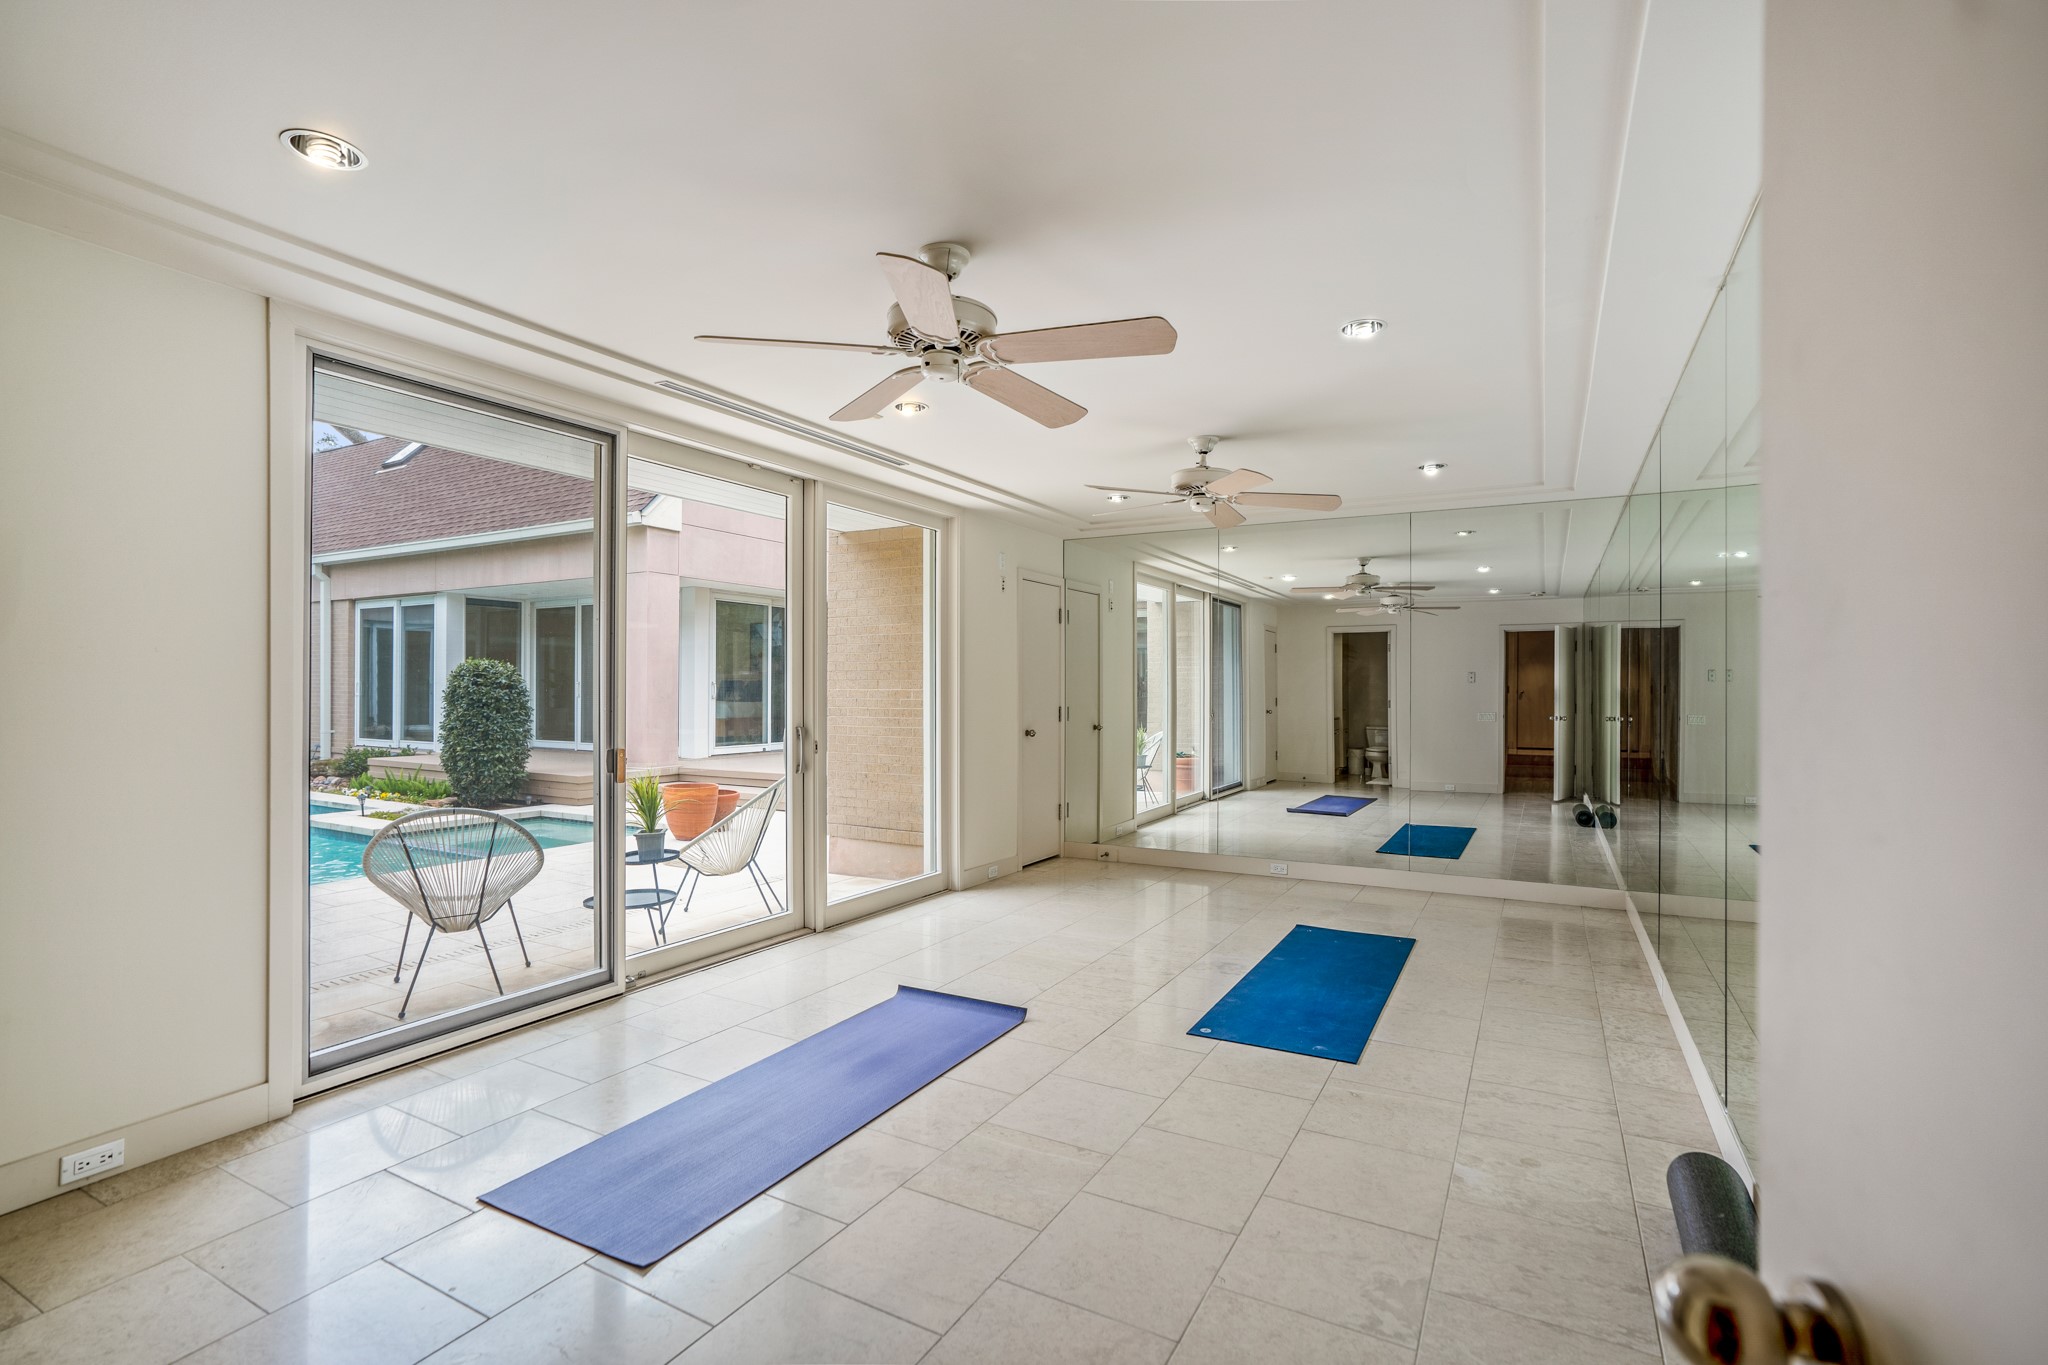 Another bedroom currently being used as a workout space that is overlooking the pool. Wall-to-wall mirrors and a closet in this room as well.